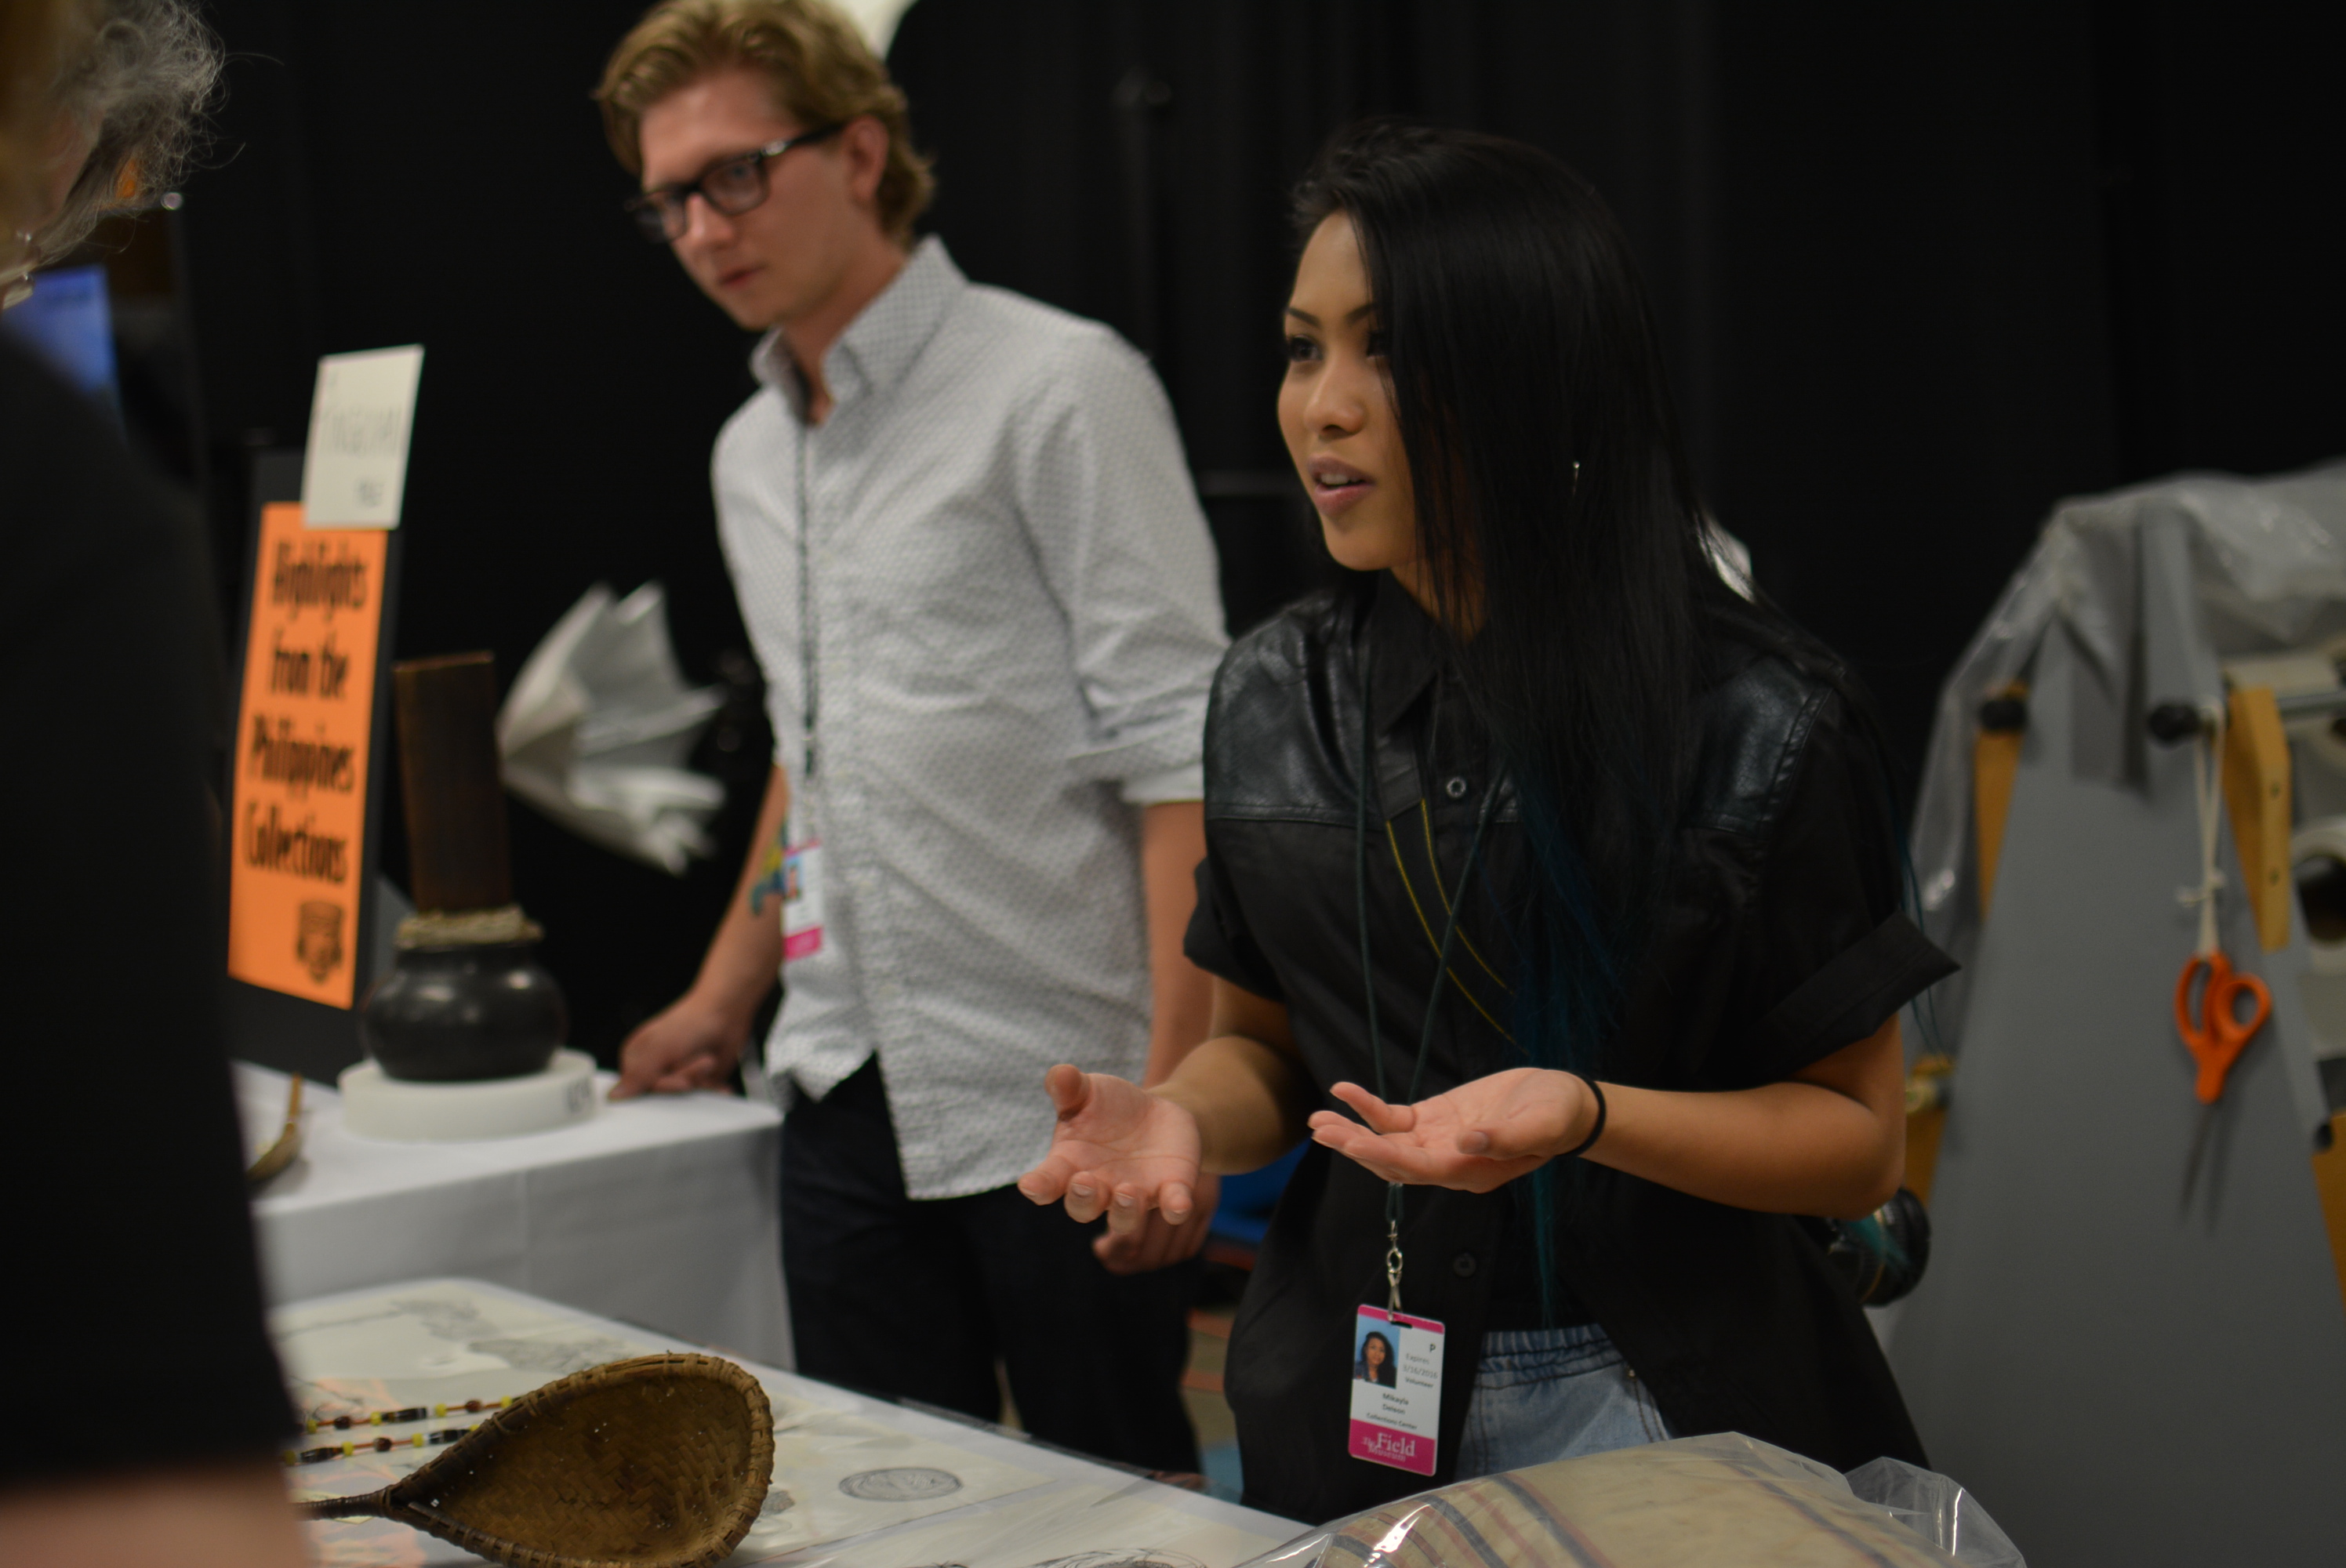 Mikayla answers guests' questions about the artifacts on display. (c) Field Museum of Natural History - CC BY-NC 4.0